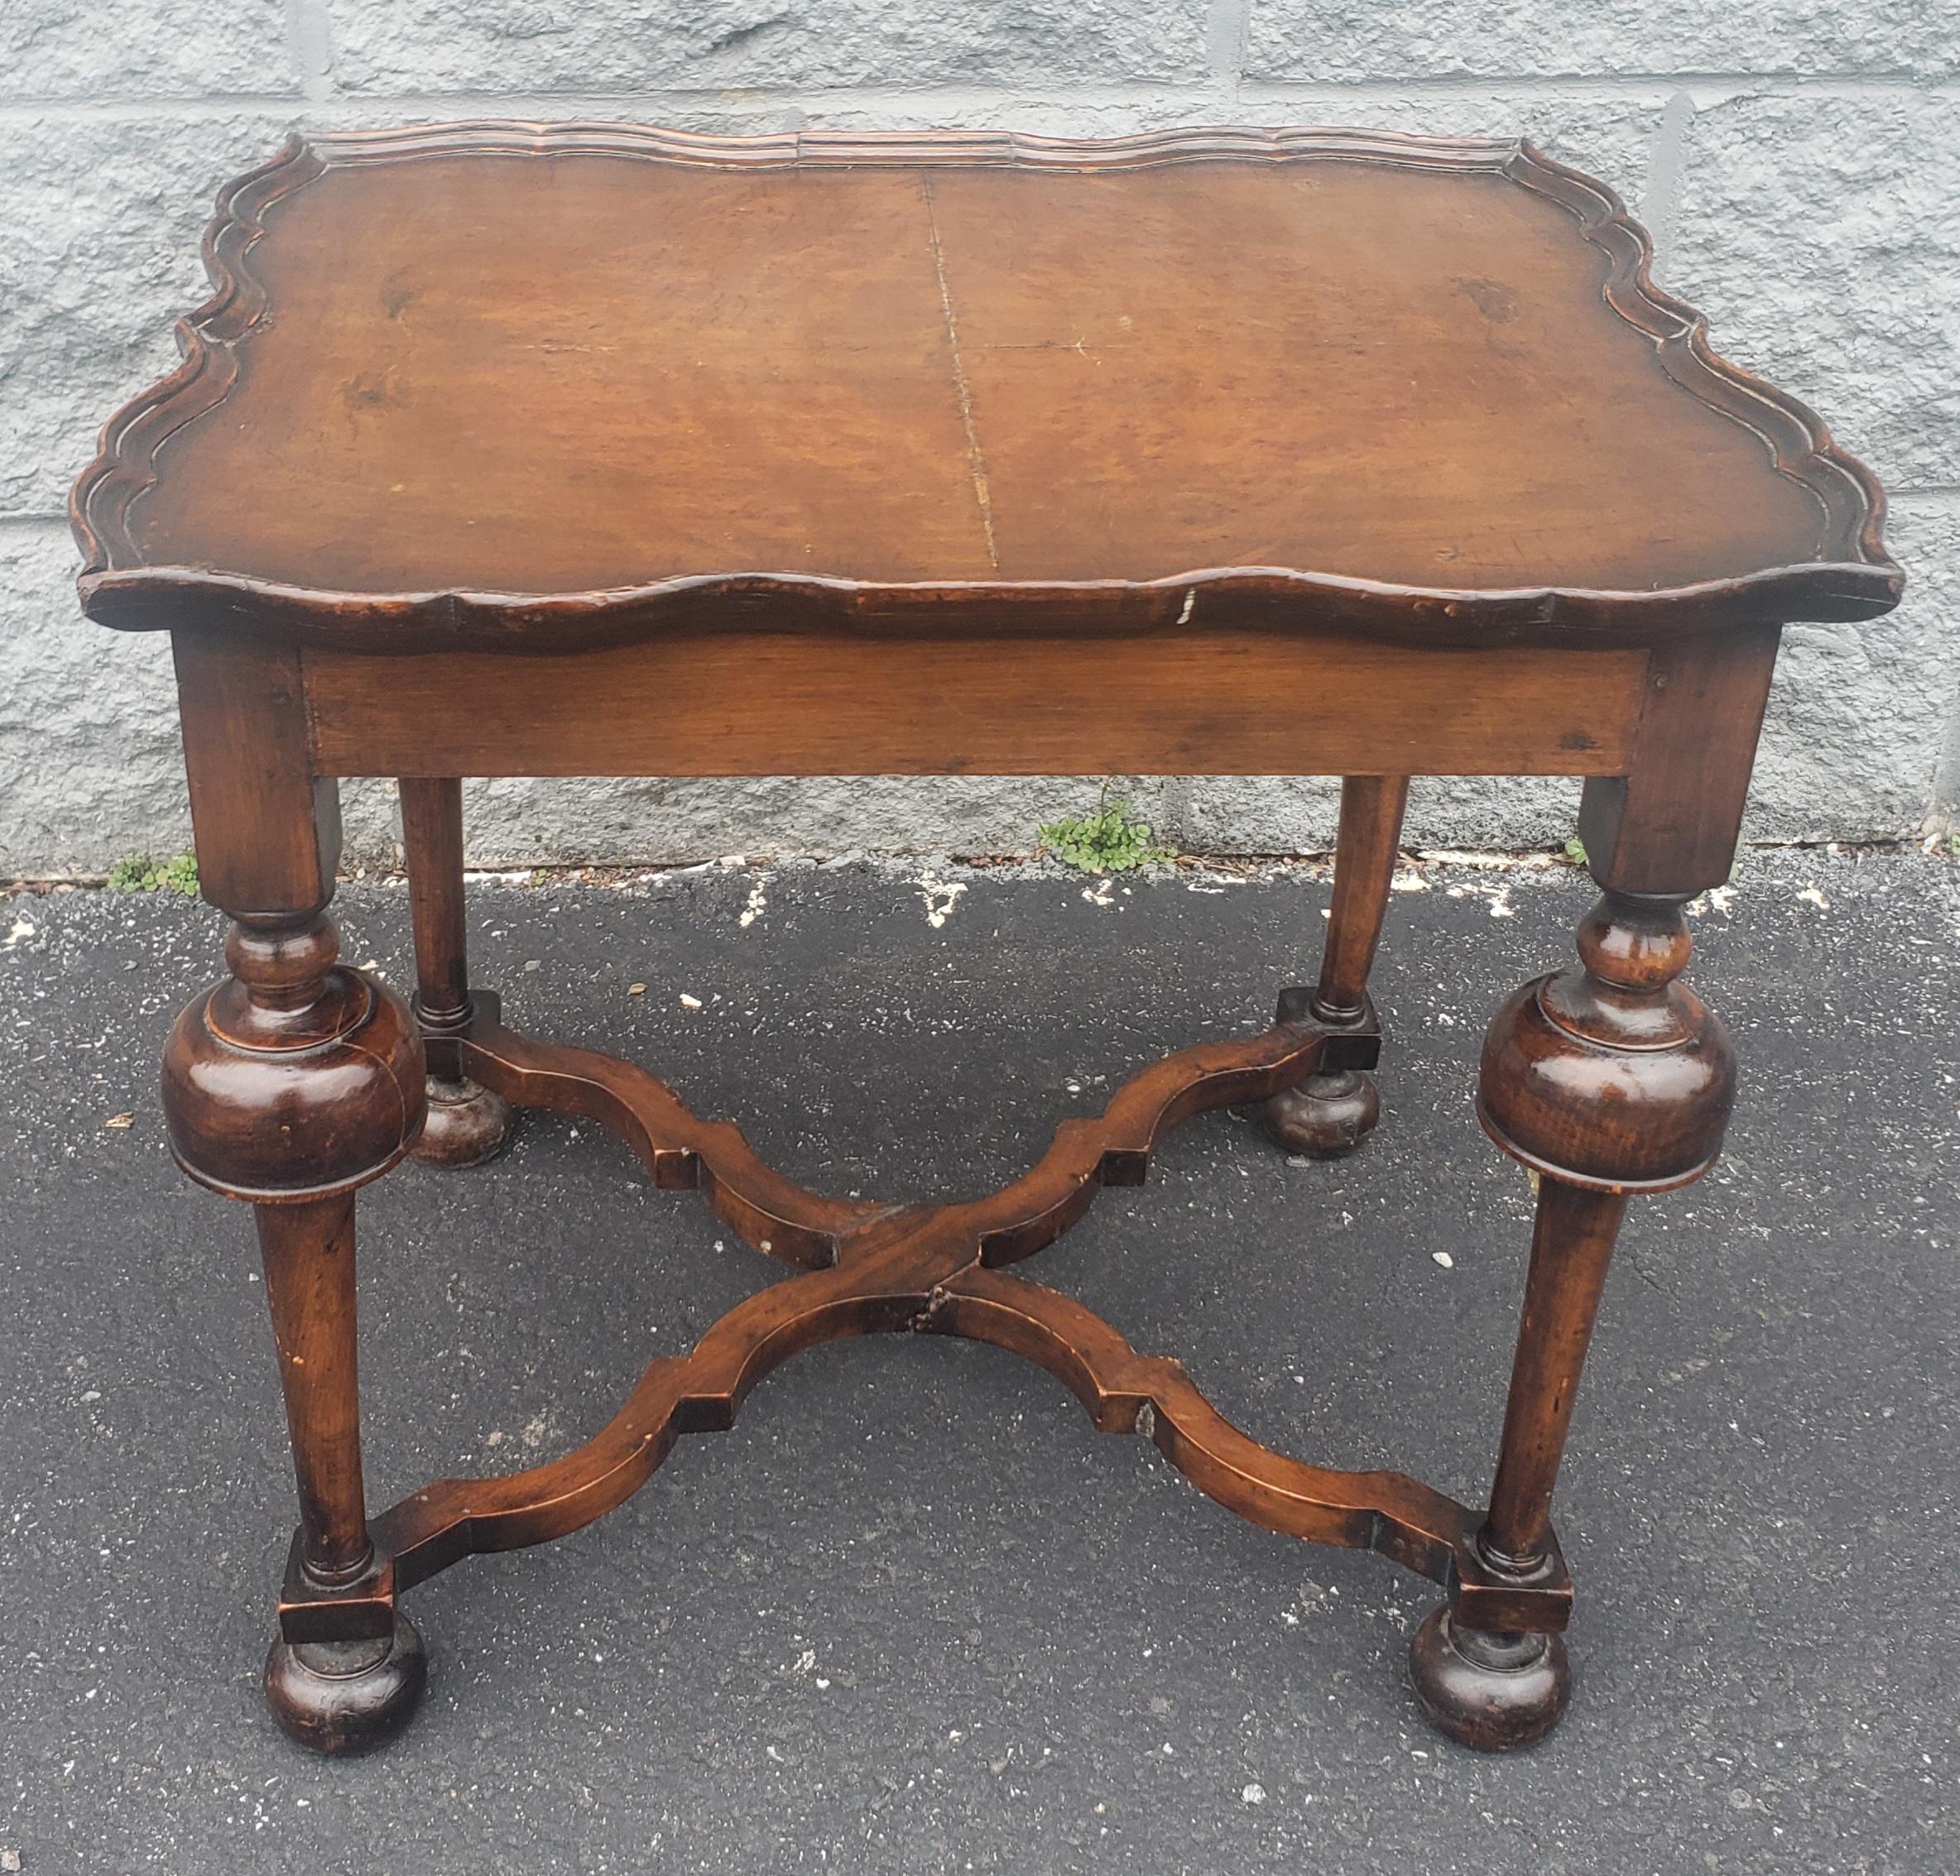 An exquisite Early American William and Mary walnut and burl side table dating from the 1890s. Nice walnut burled top with great patina. Measures 20